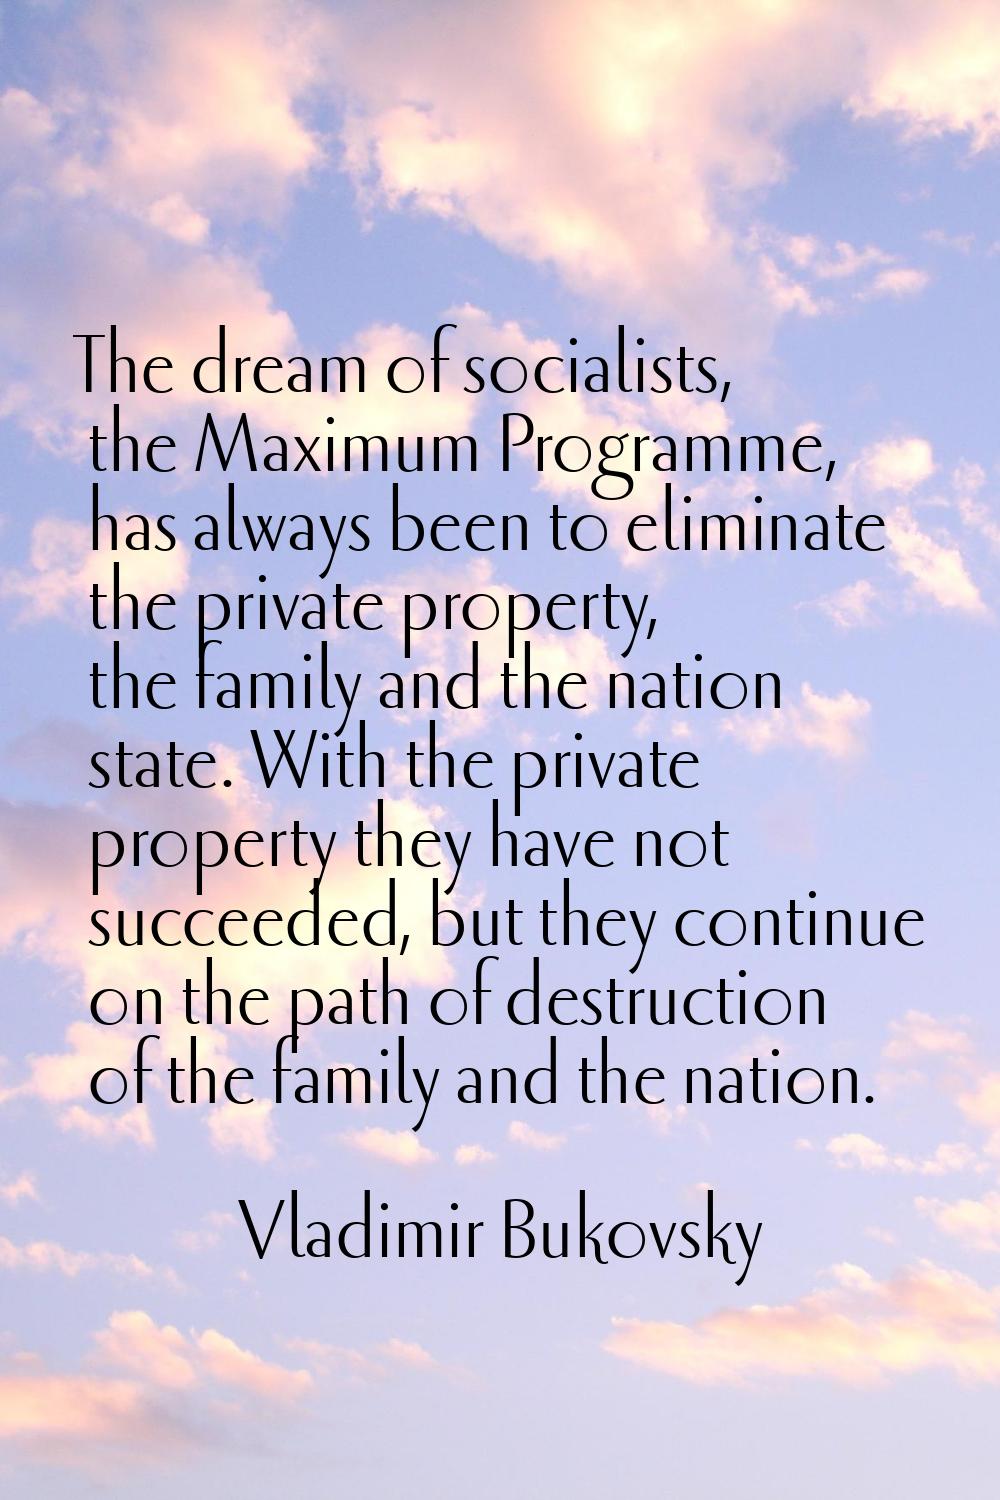 The dream of socialists, the Maximum Programme, has always been to eliminate the private property, 